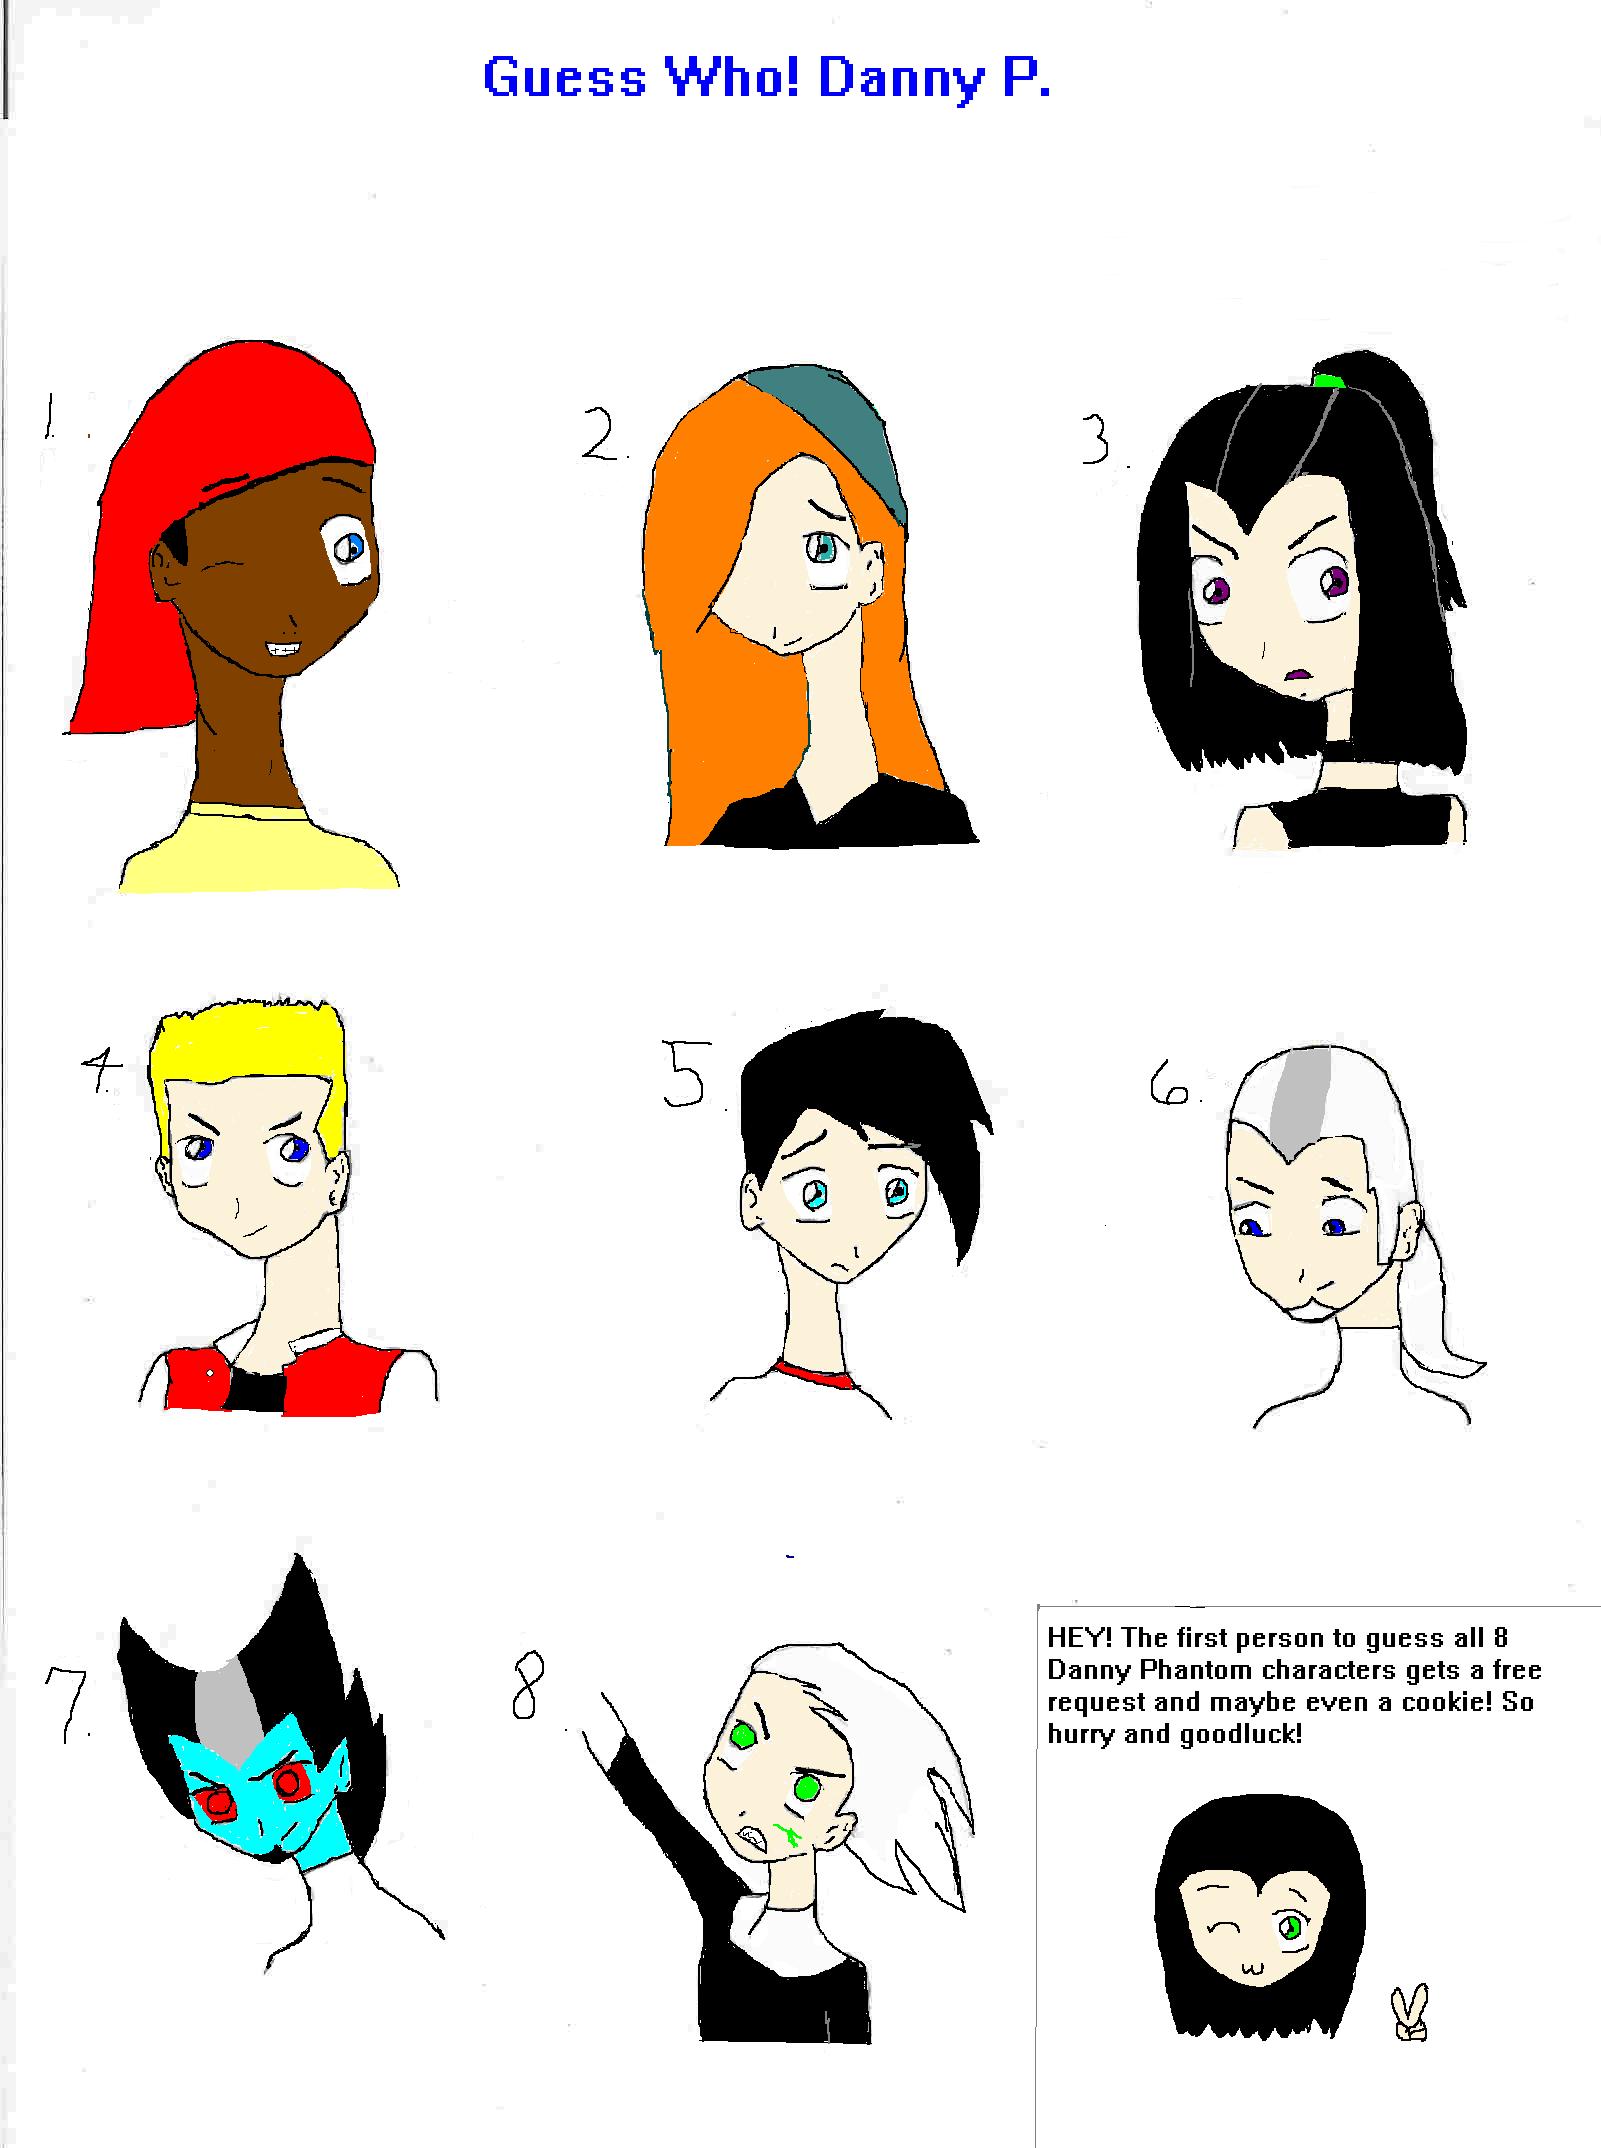 'Guess who' Danny Phantom by Hieis_lover_and_obsessor